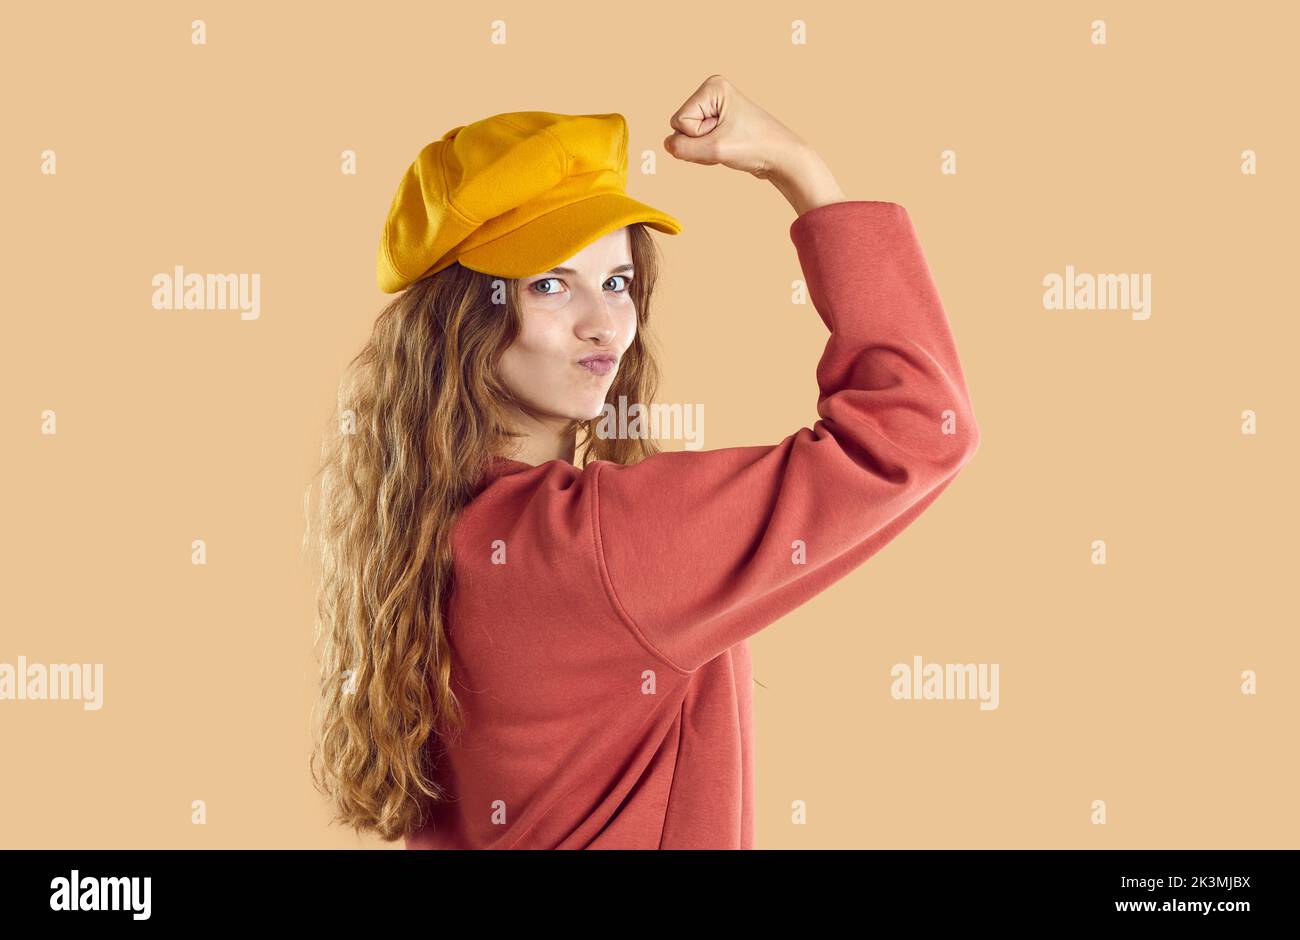 Confident young woman with wavy hair in yellow cap beret and red sweatshirt demonstrates power. Stock Photo